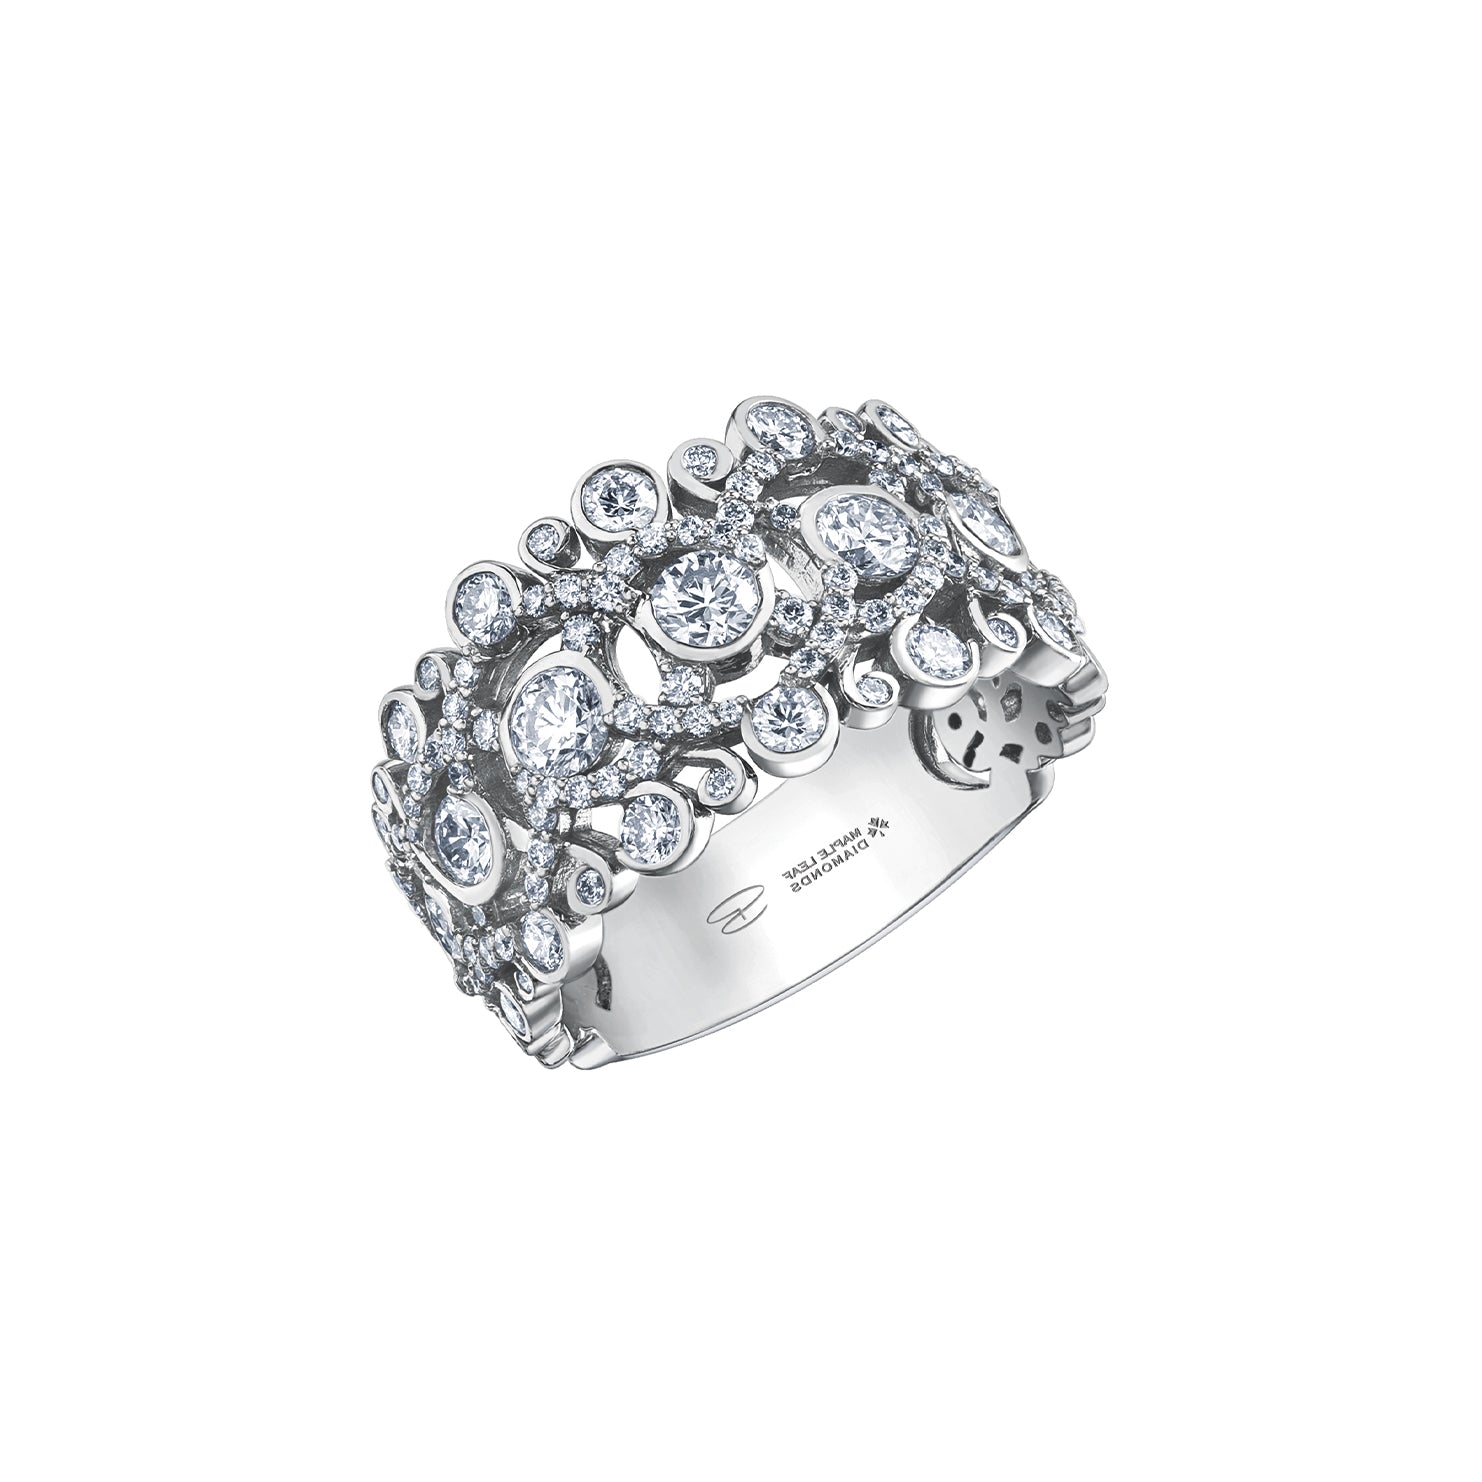 Crafted in 14KT white Certified Canadian Gold, this ring features a swirling design set with round brilliant-cut Canadian diamonds. 